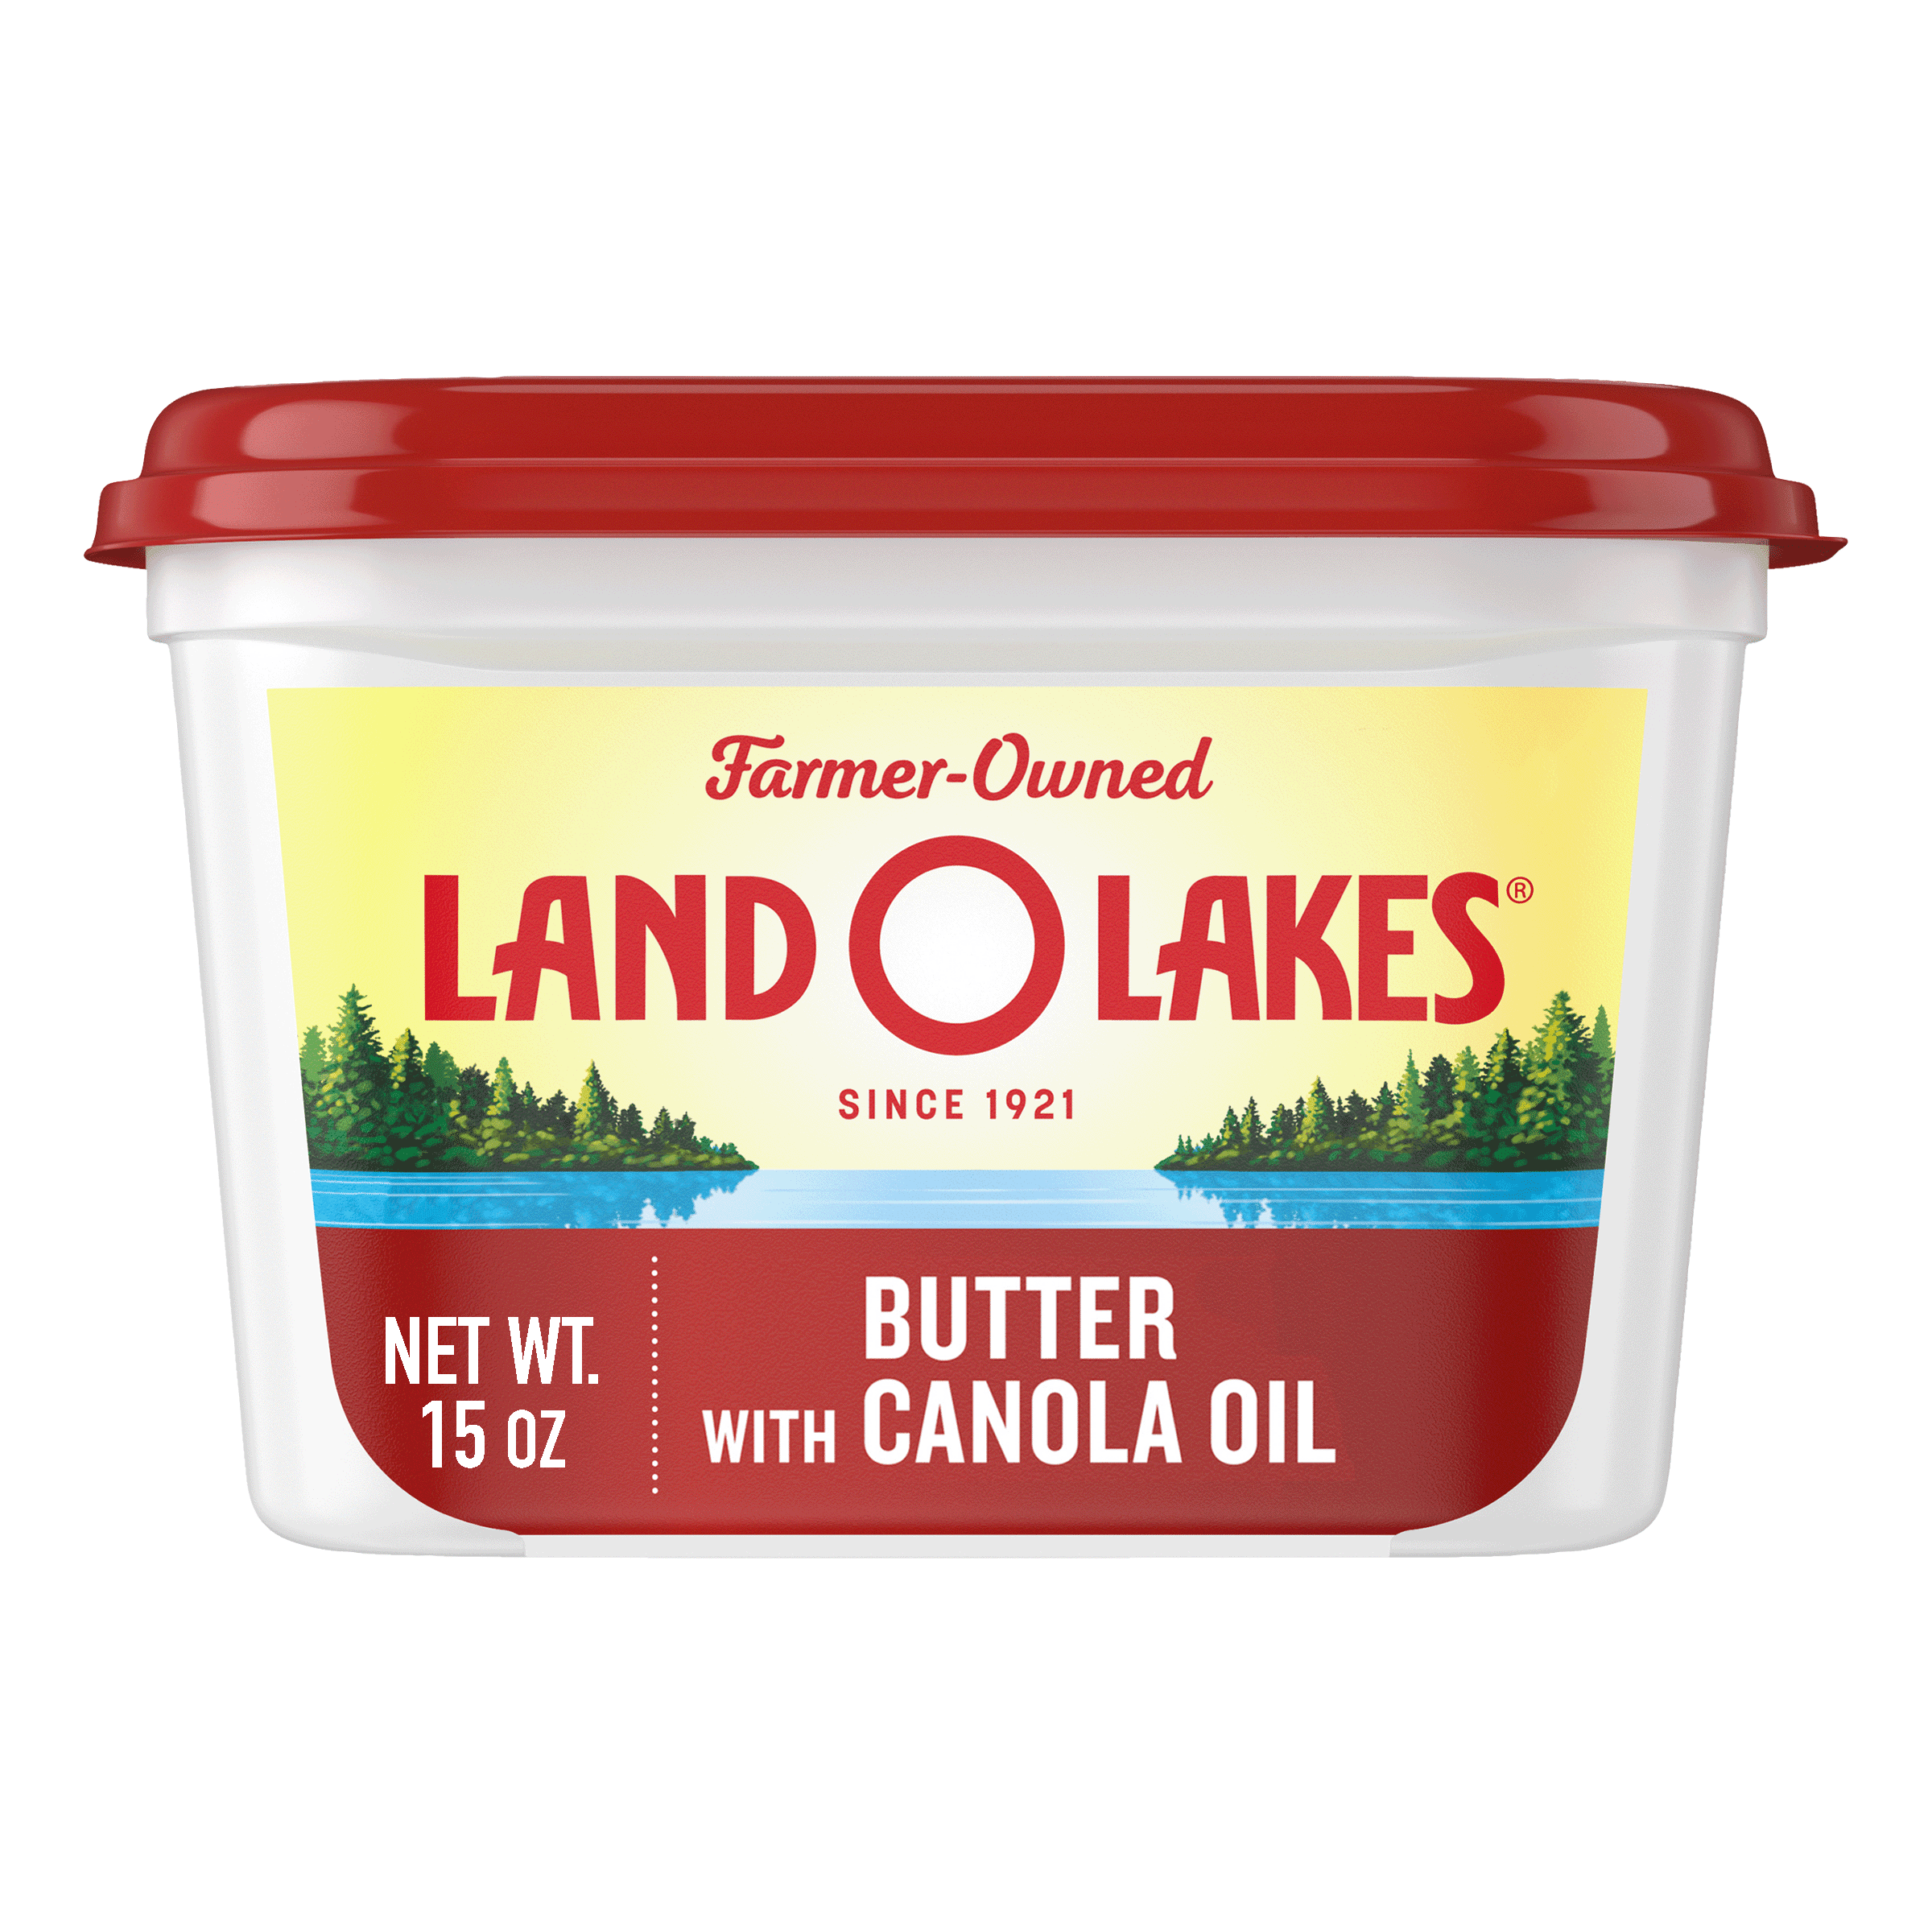 Land O Lakes Butter with Canola Oil, 15 oz Tub